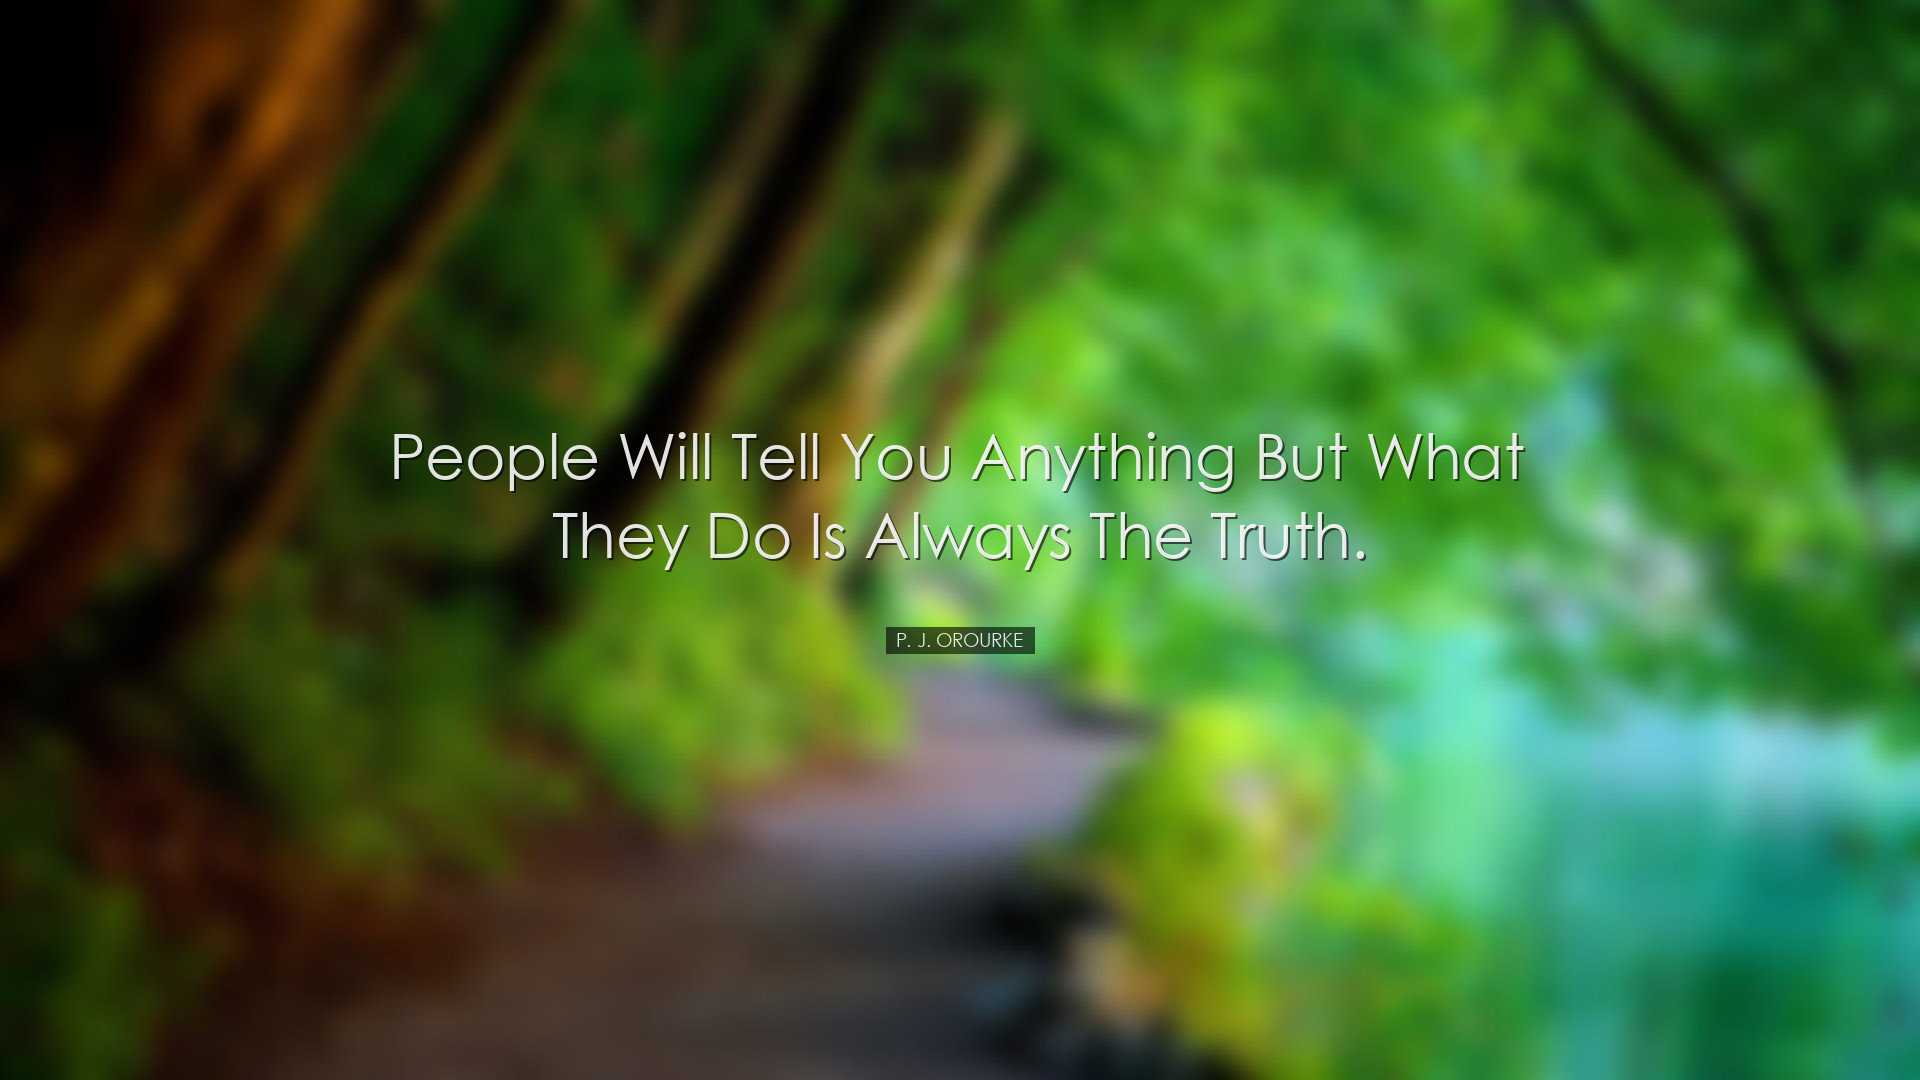 People will tell you anything but what they do is always the truth